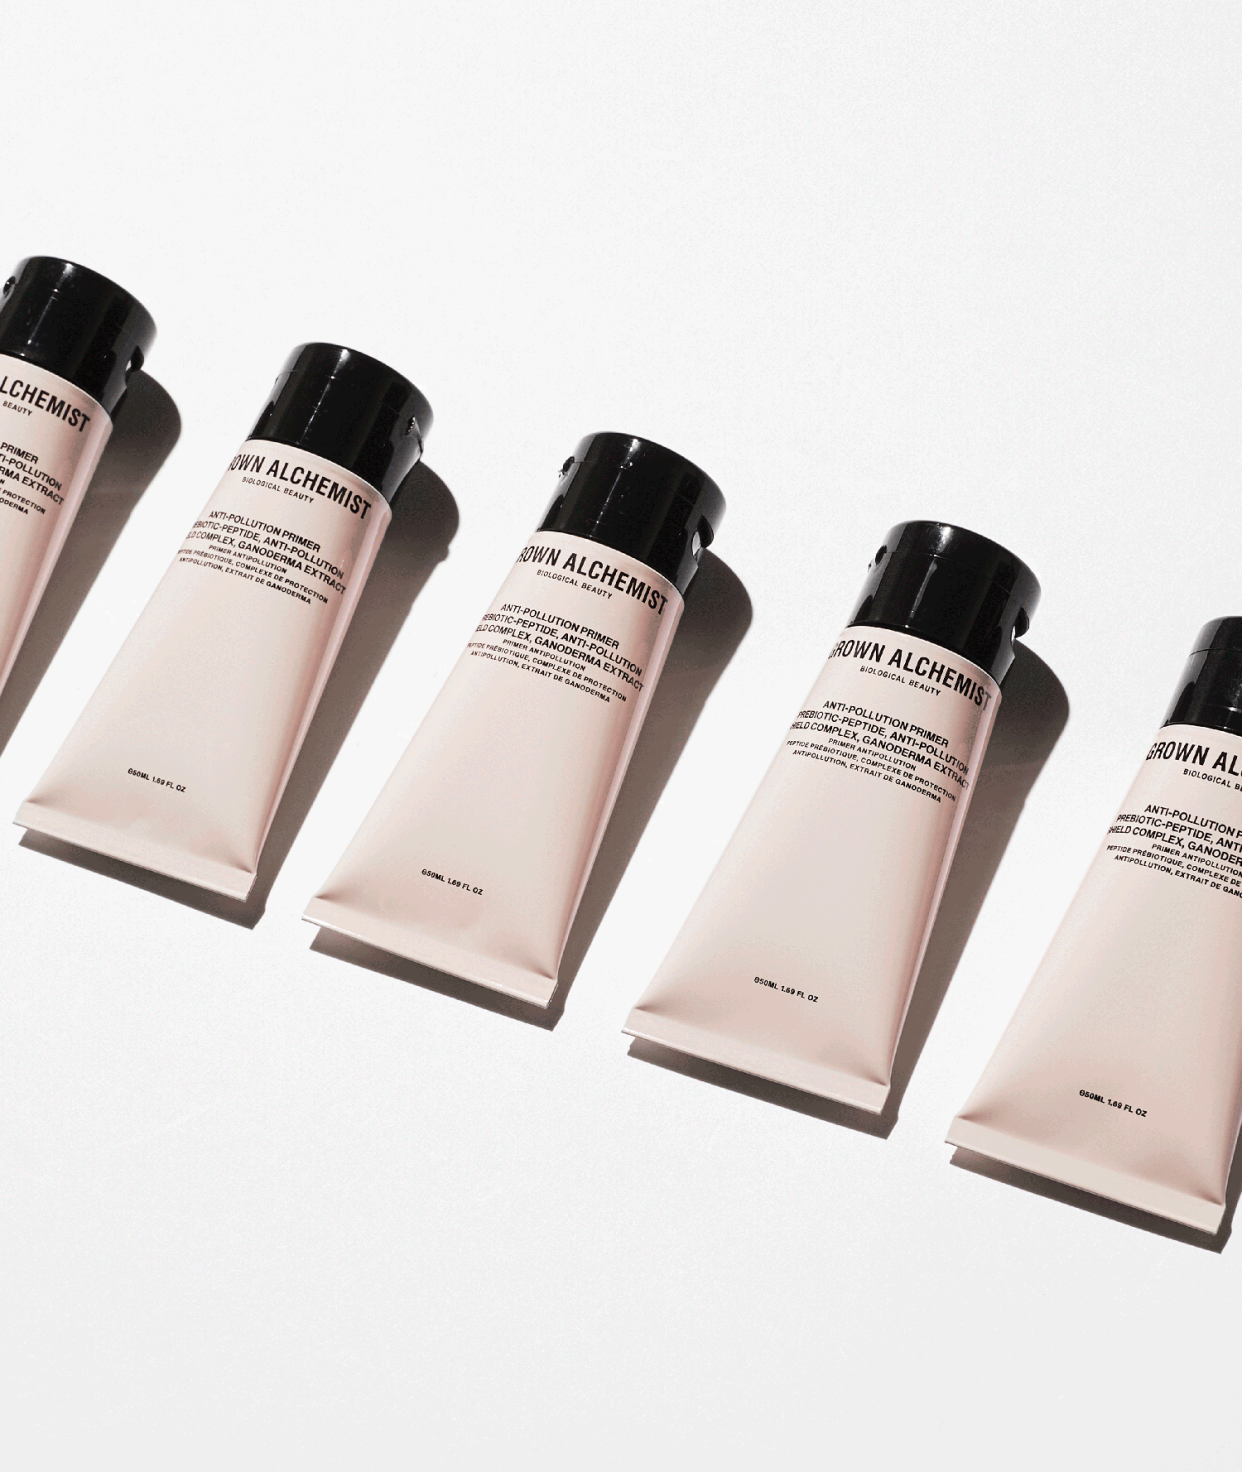 This Pore Blurring Primer Is Like a Real Life Filter for My Skin